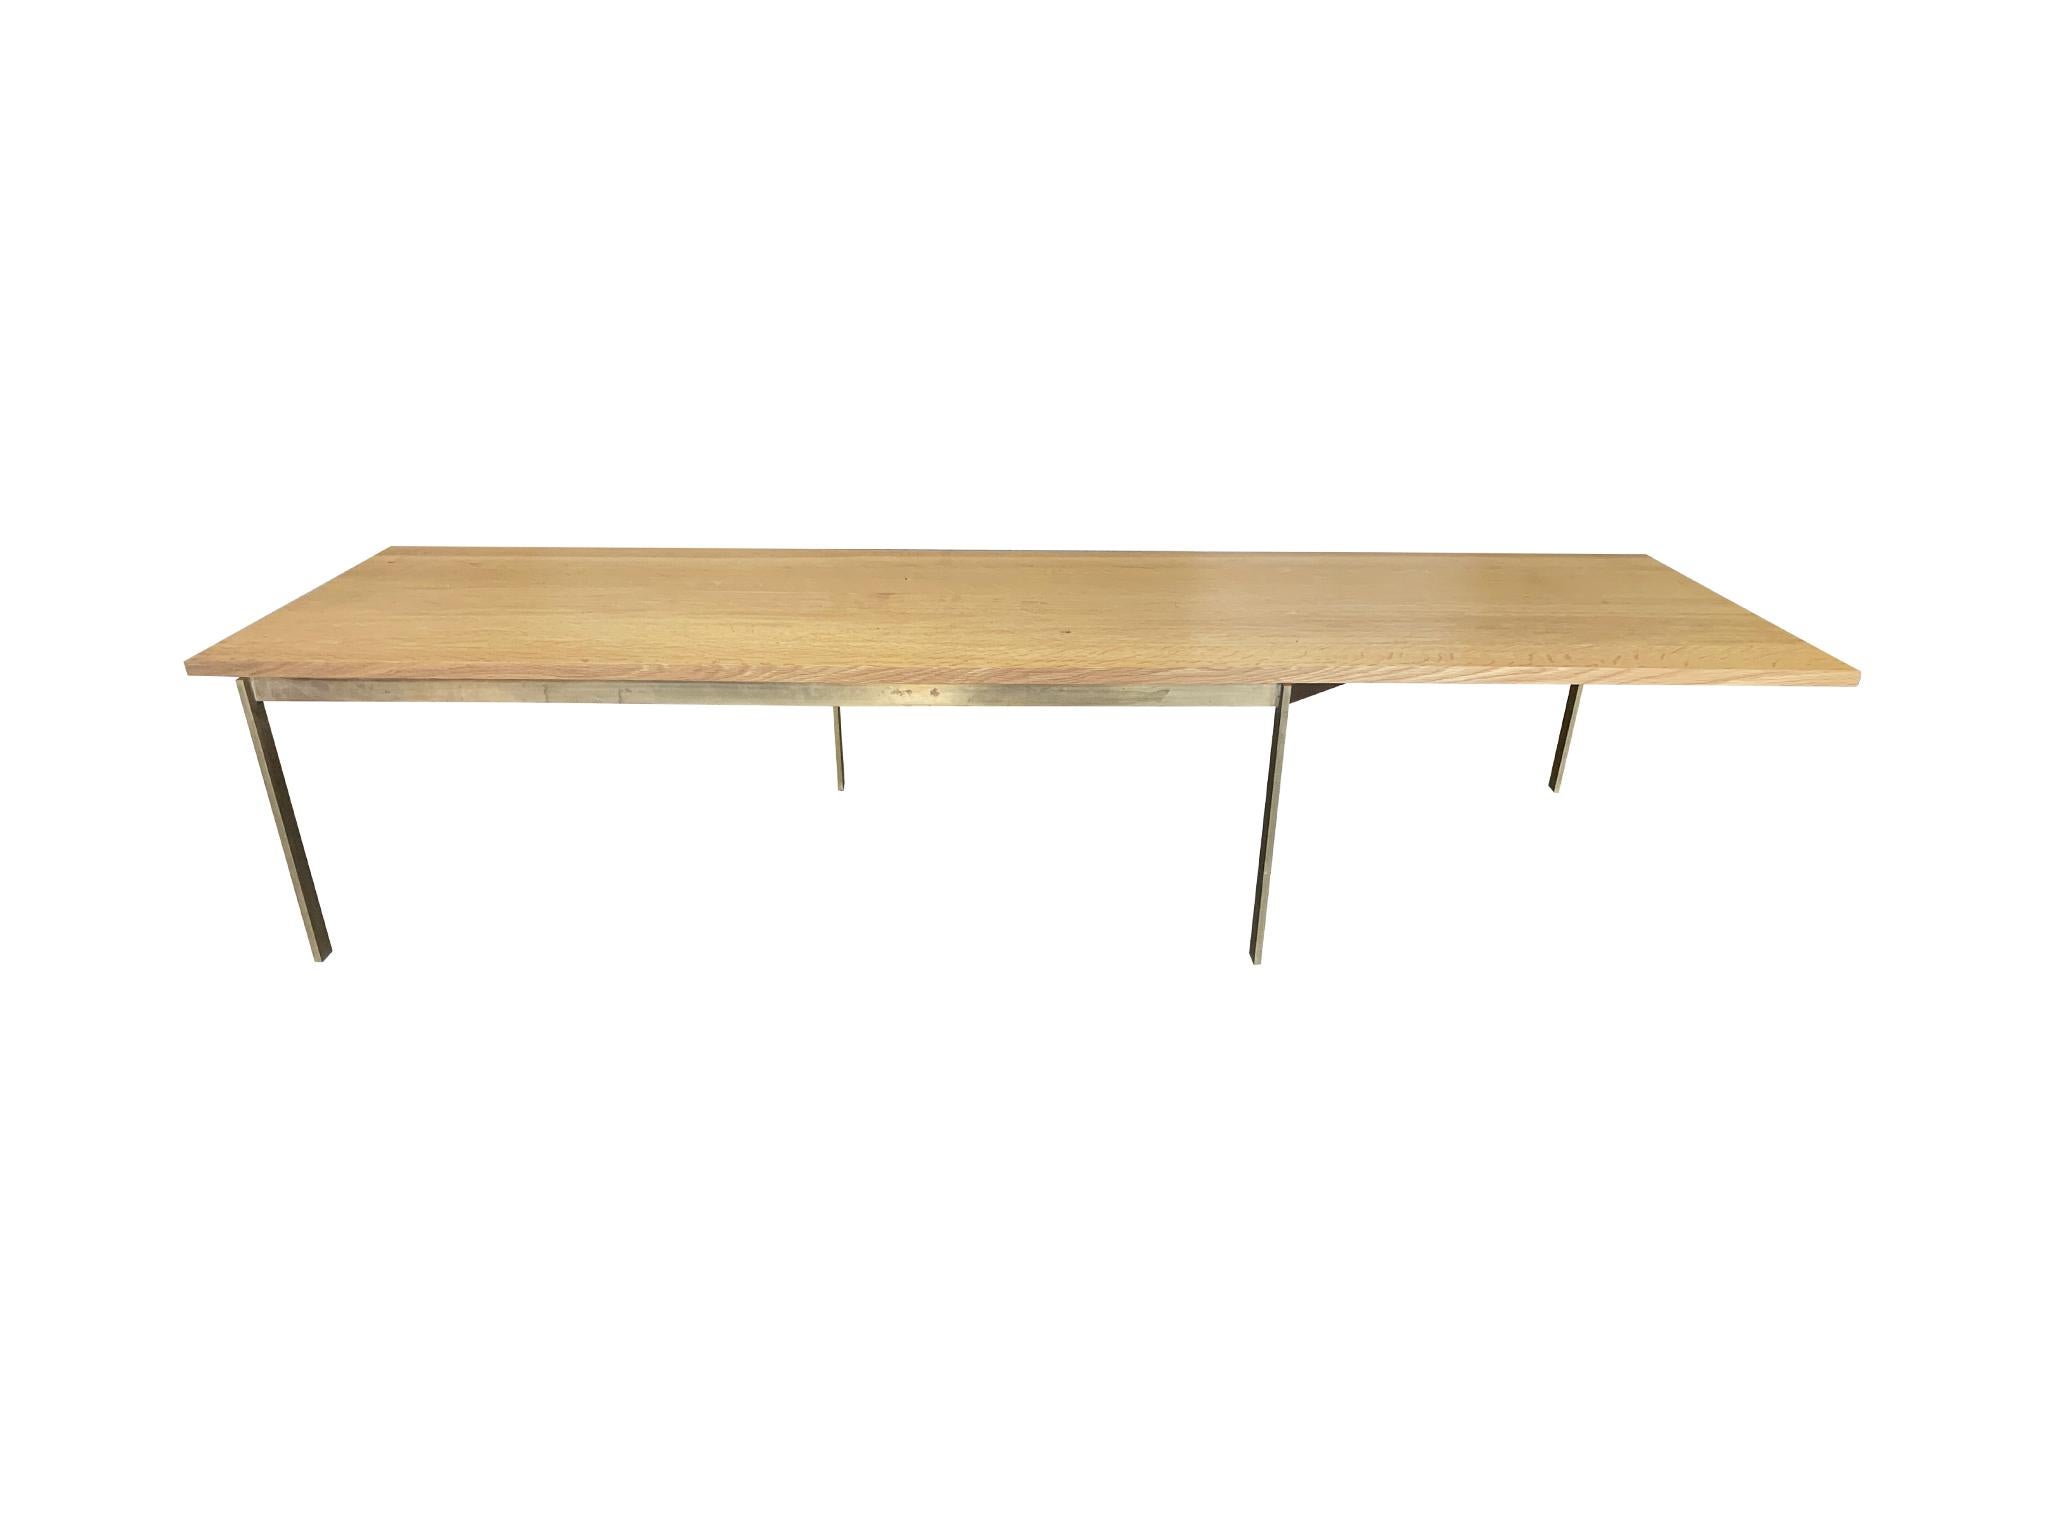 Bespoke coffee table designed by BassamFellows as part of their Plank Occasional Table Collection. It's comprised of an oak top and brass base. The base has a dynamic structure that gives the top the appearance of suspension.

Dimensions:
78 in.